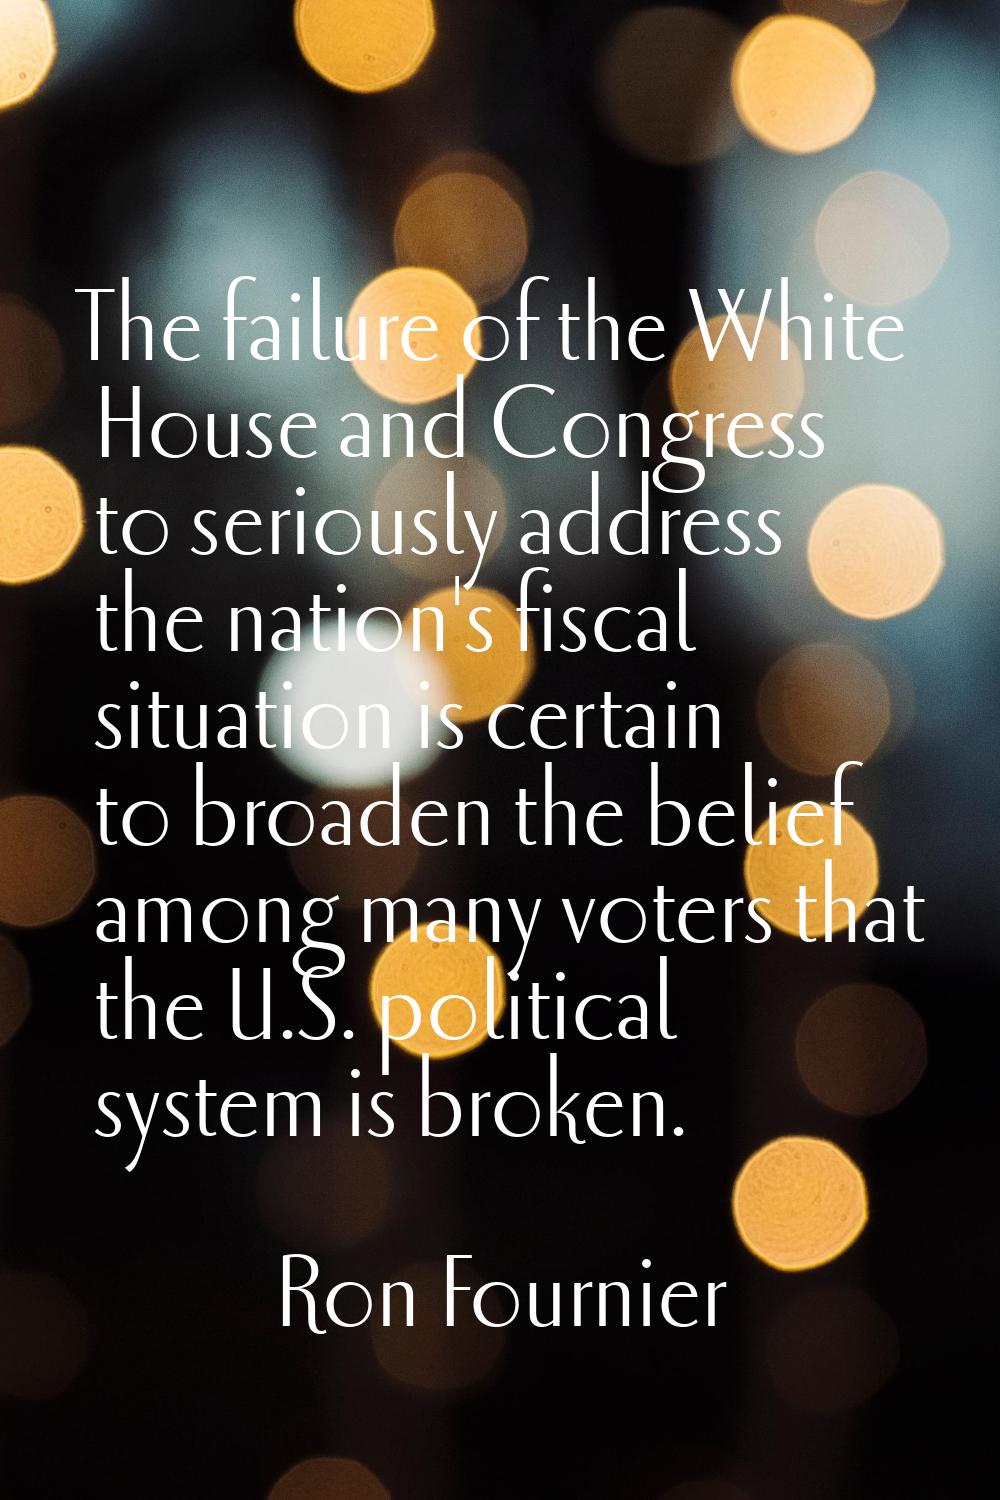 The failure of the White House and Congress to seriously address the nation's fiscal situation is c